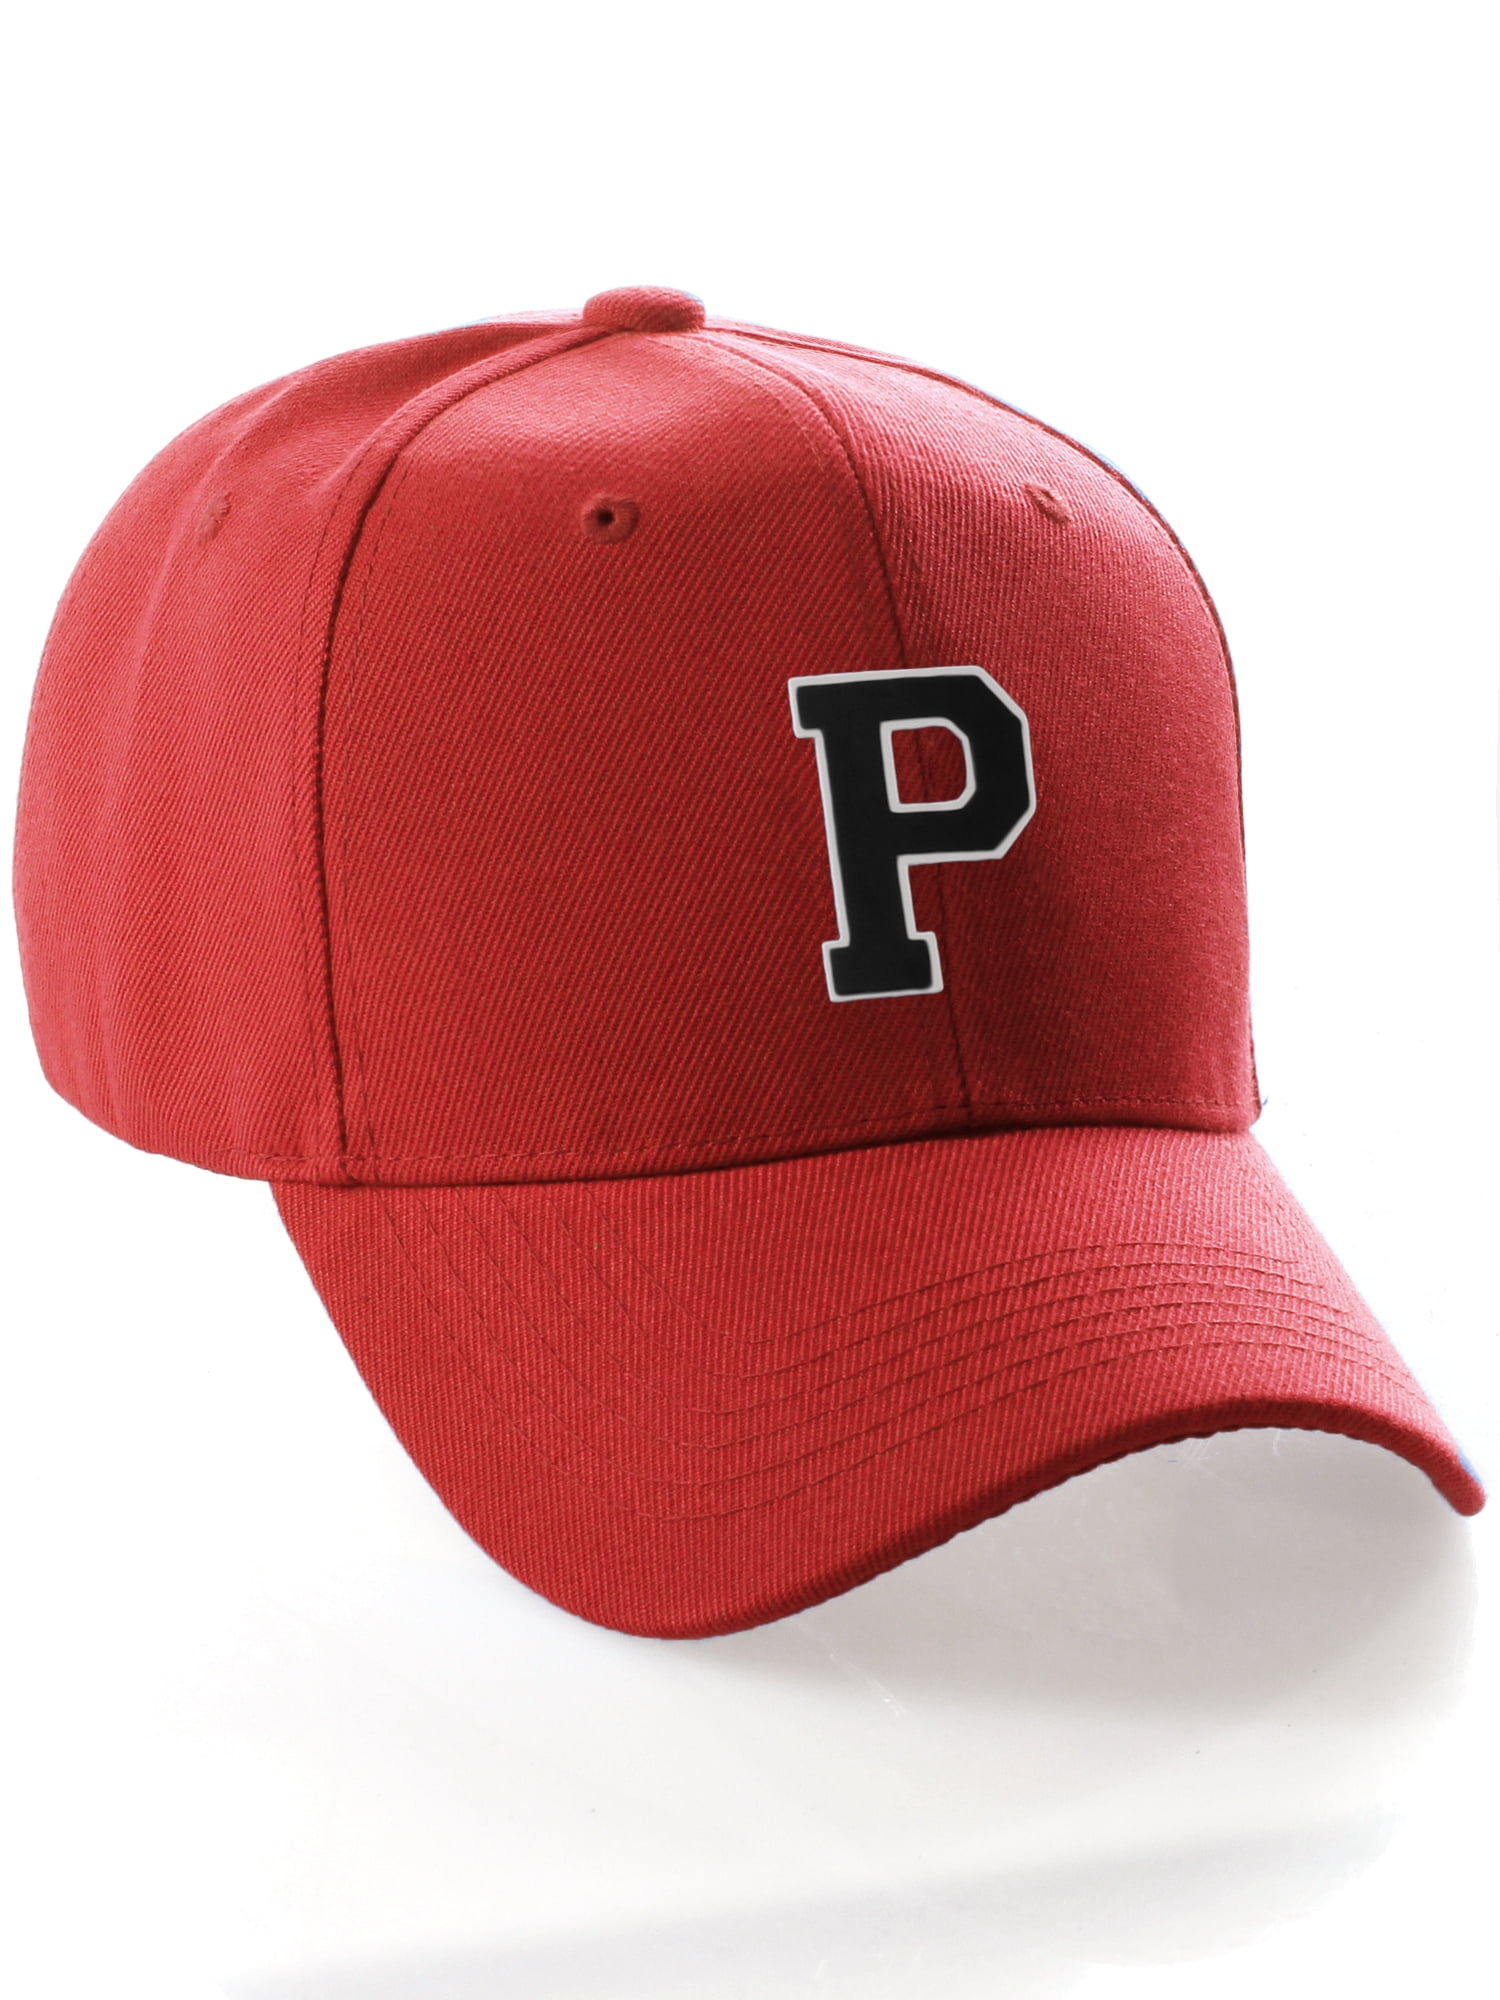 Classic 3D Raised Initial Letters A to Z Structured Baseball Hat Cap  Adjustable, Red Hat White Black Letter P